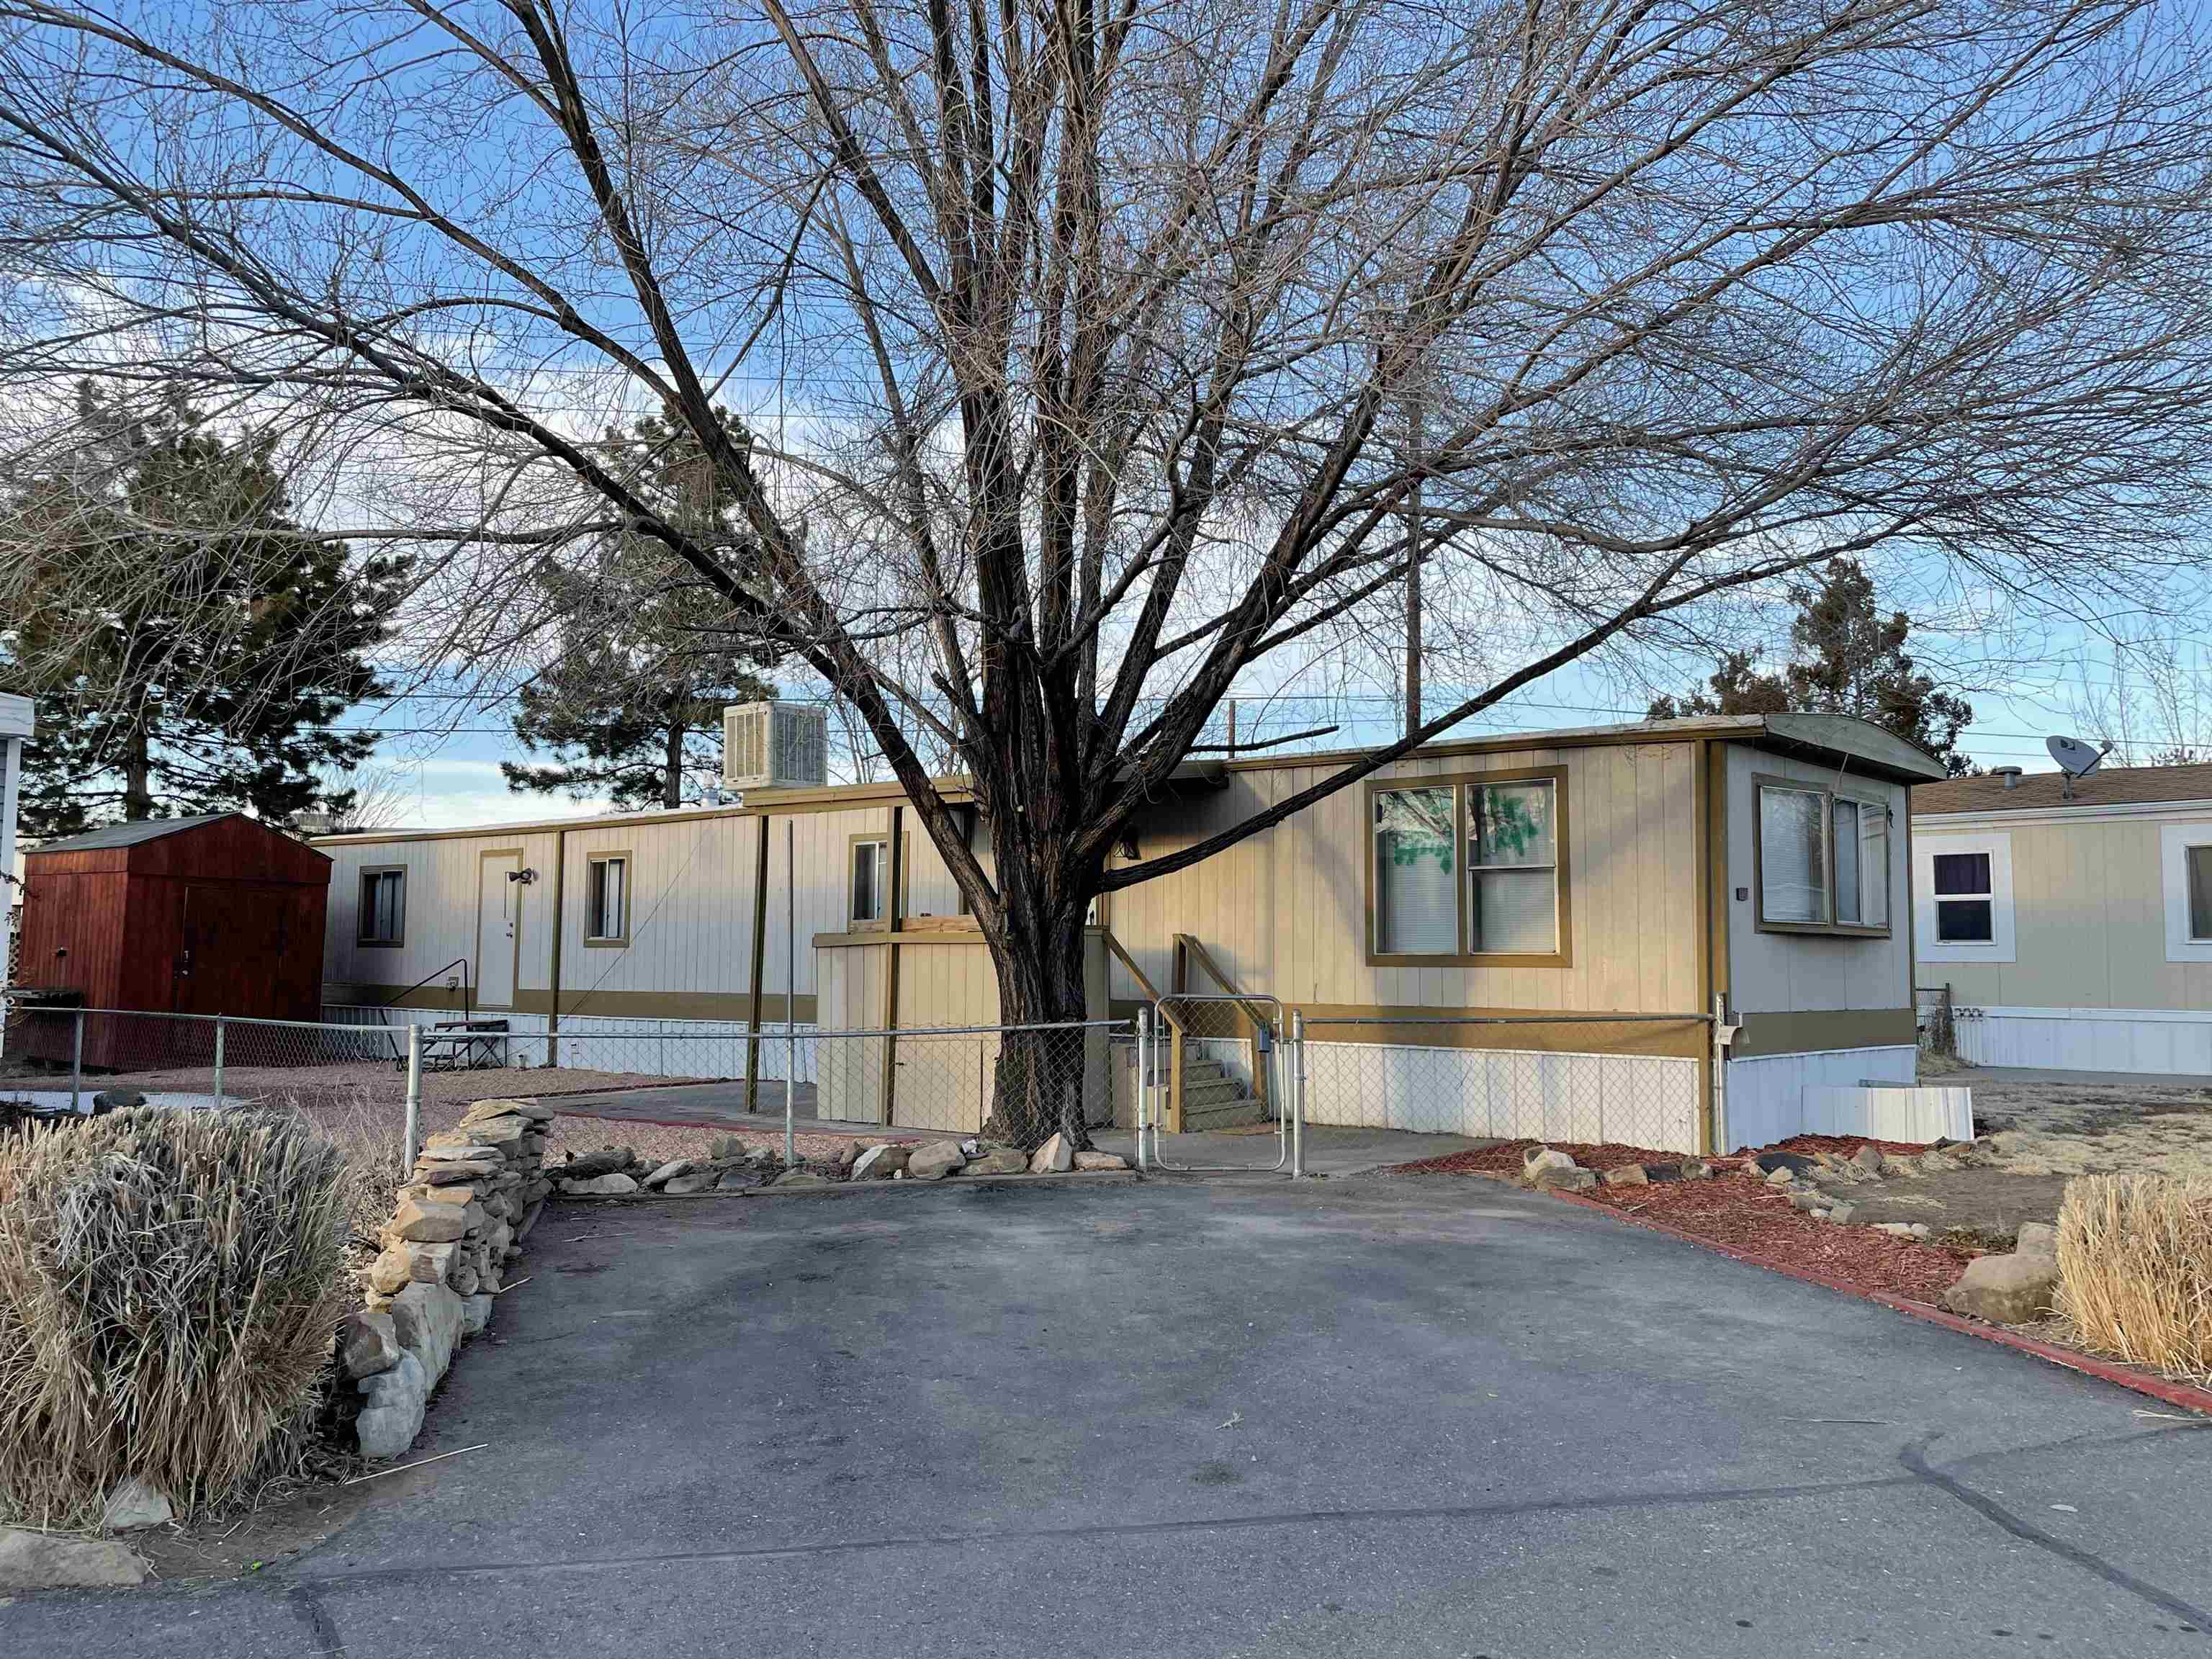 585 25 1/2 Road 137, Grand Junction, CO 81505